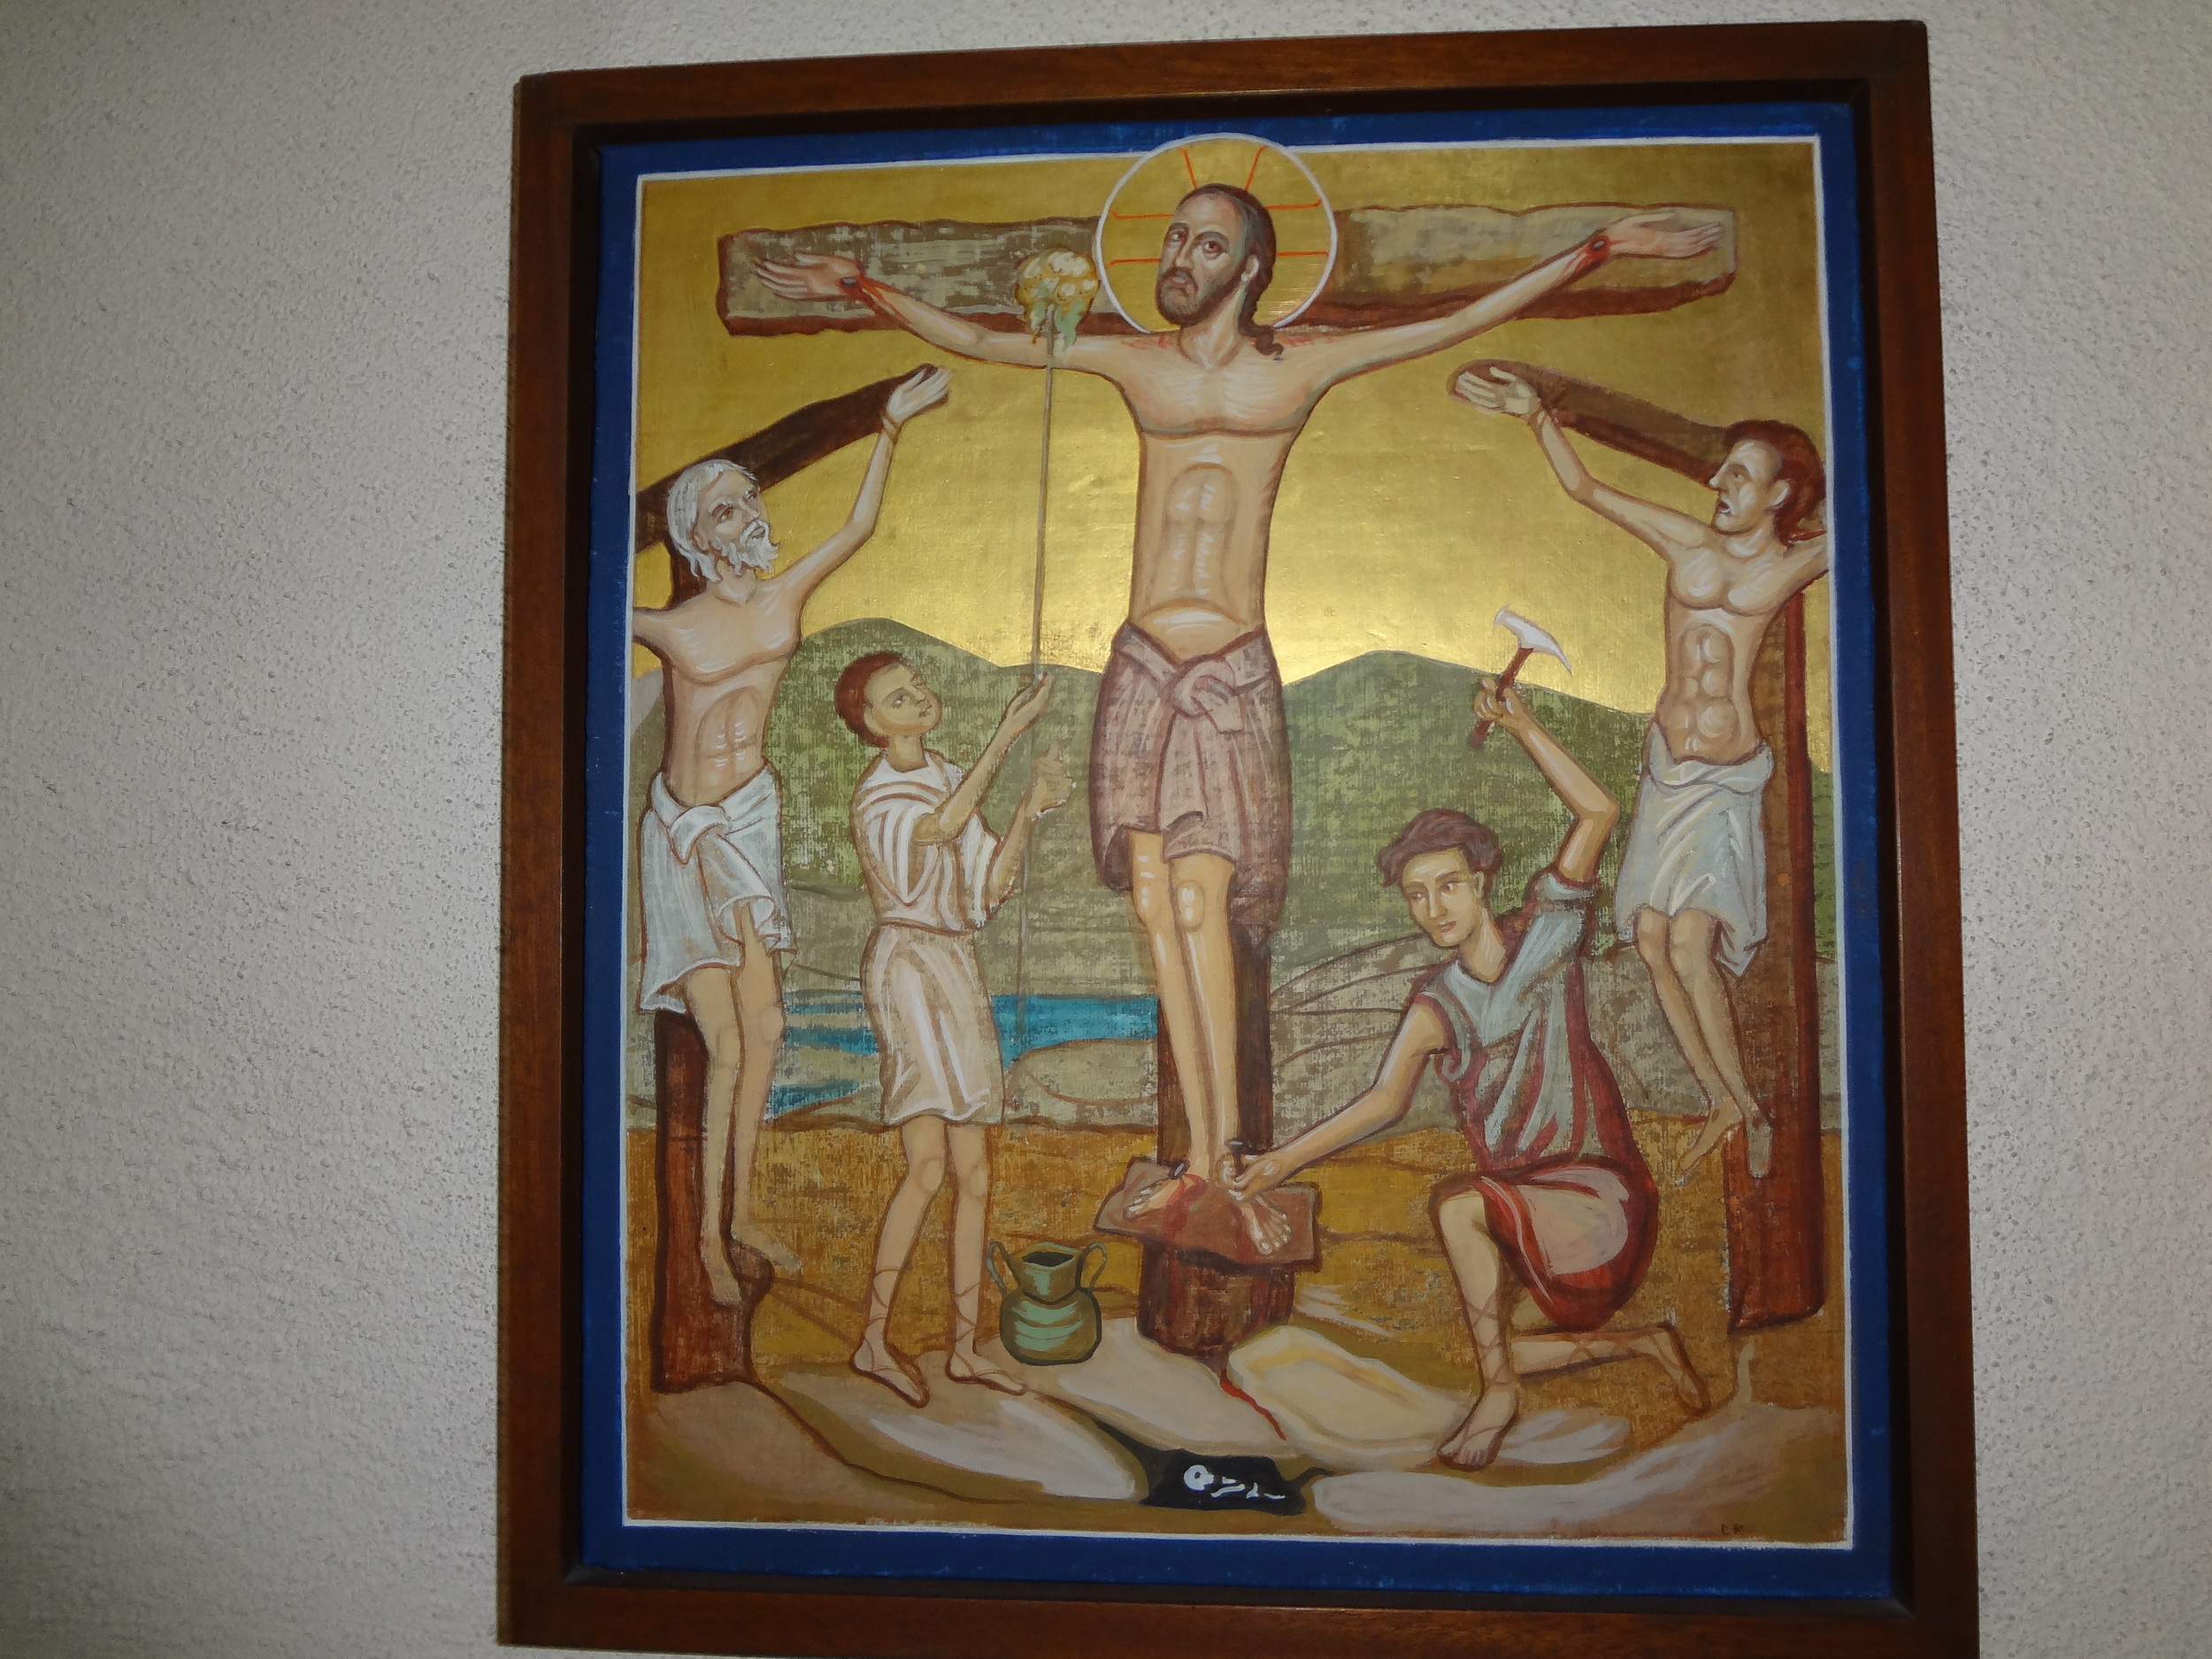 Station 11 -Jesus nailed to the cross